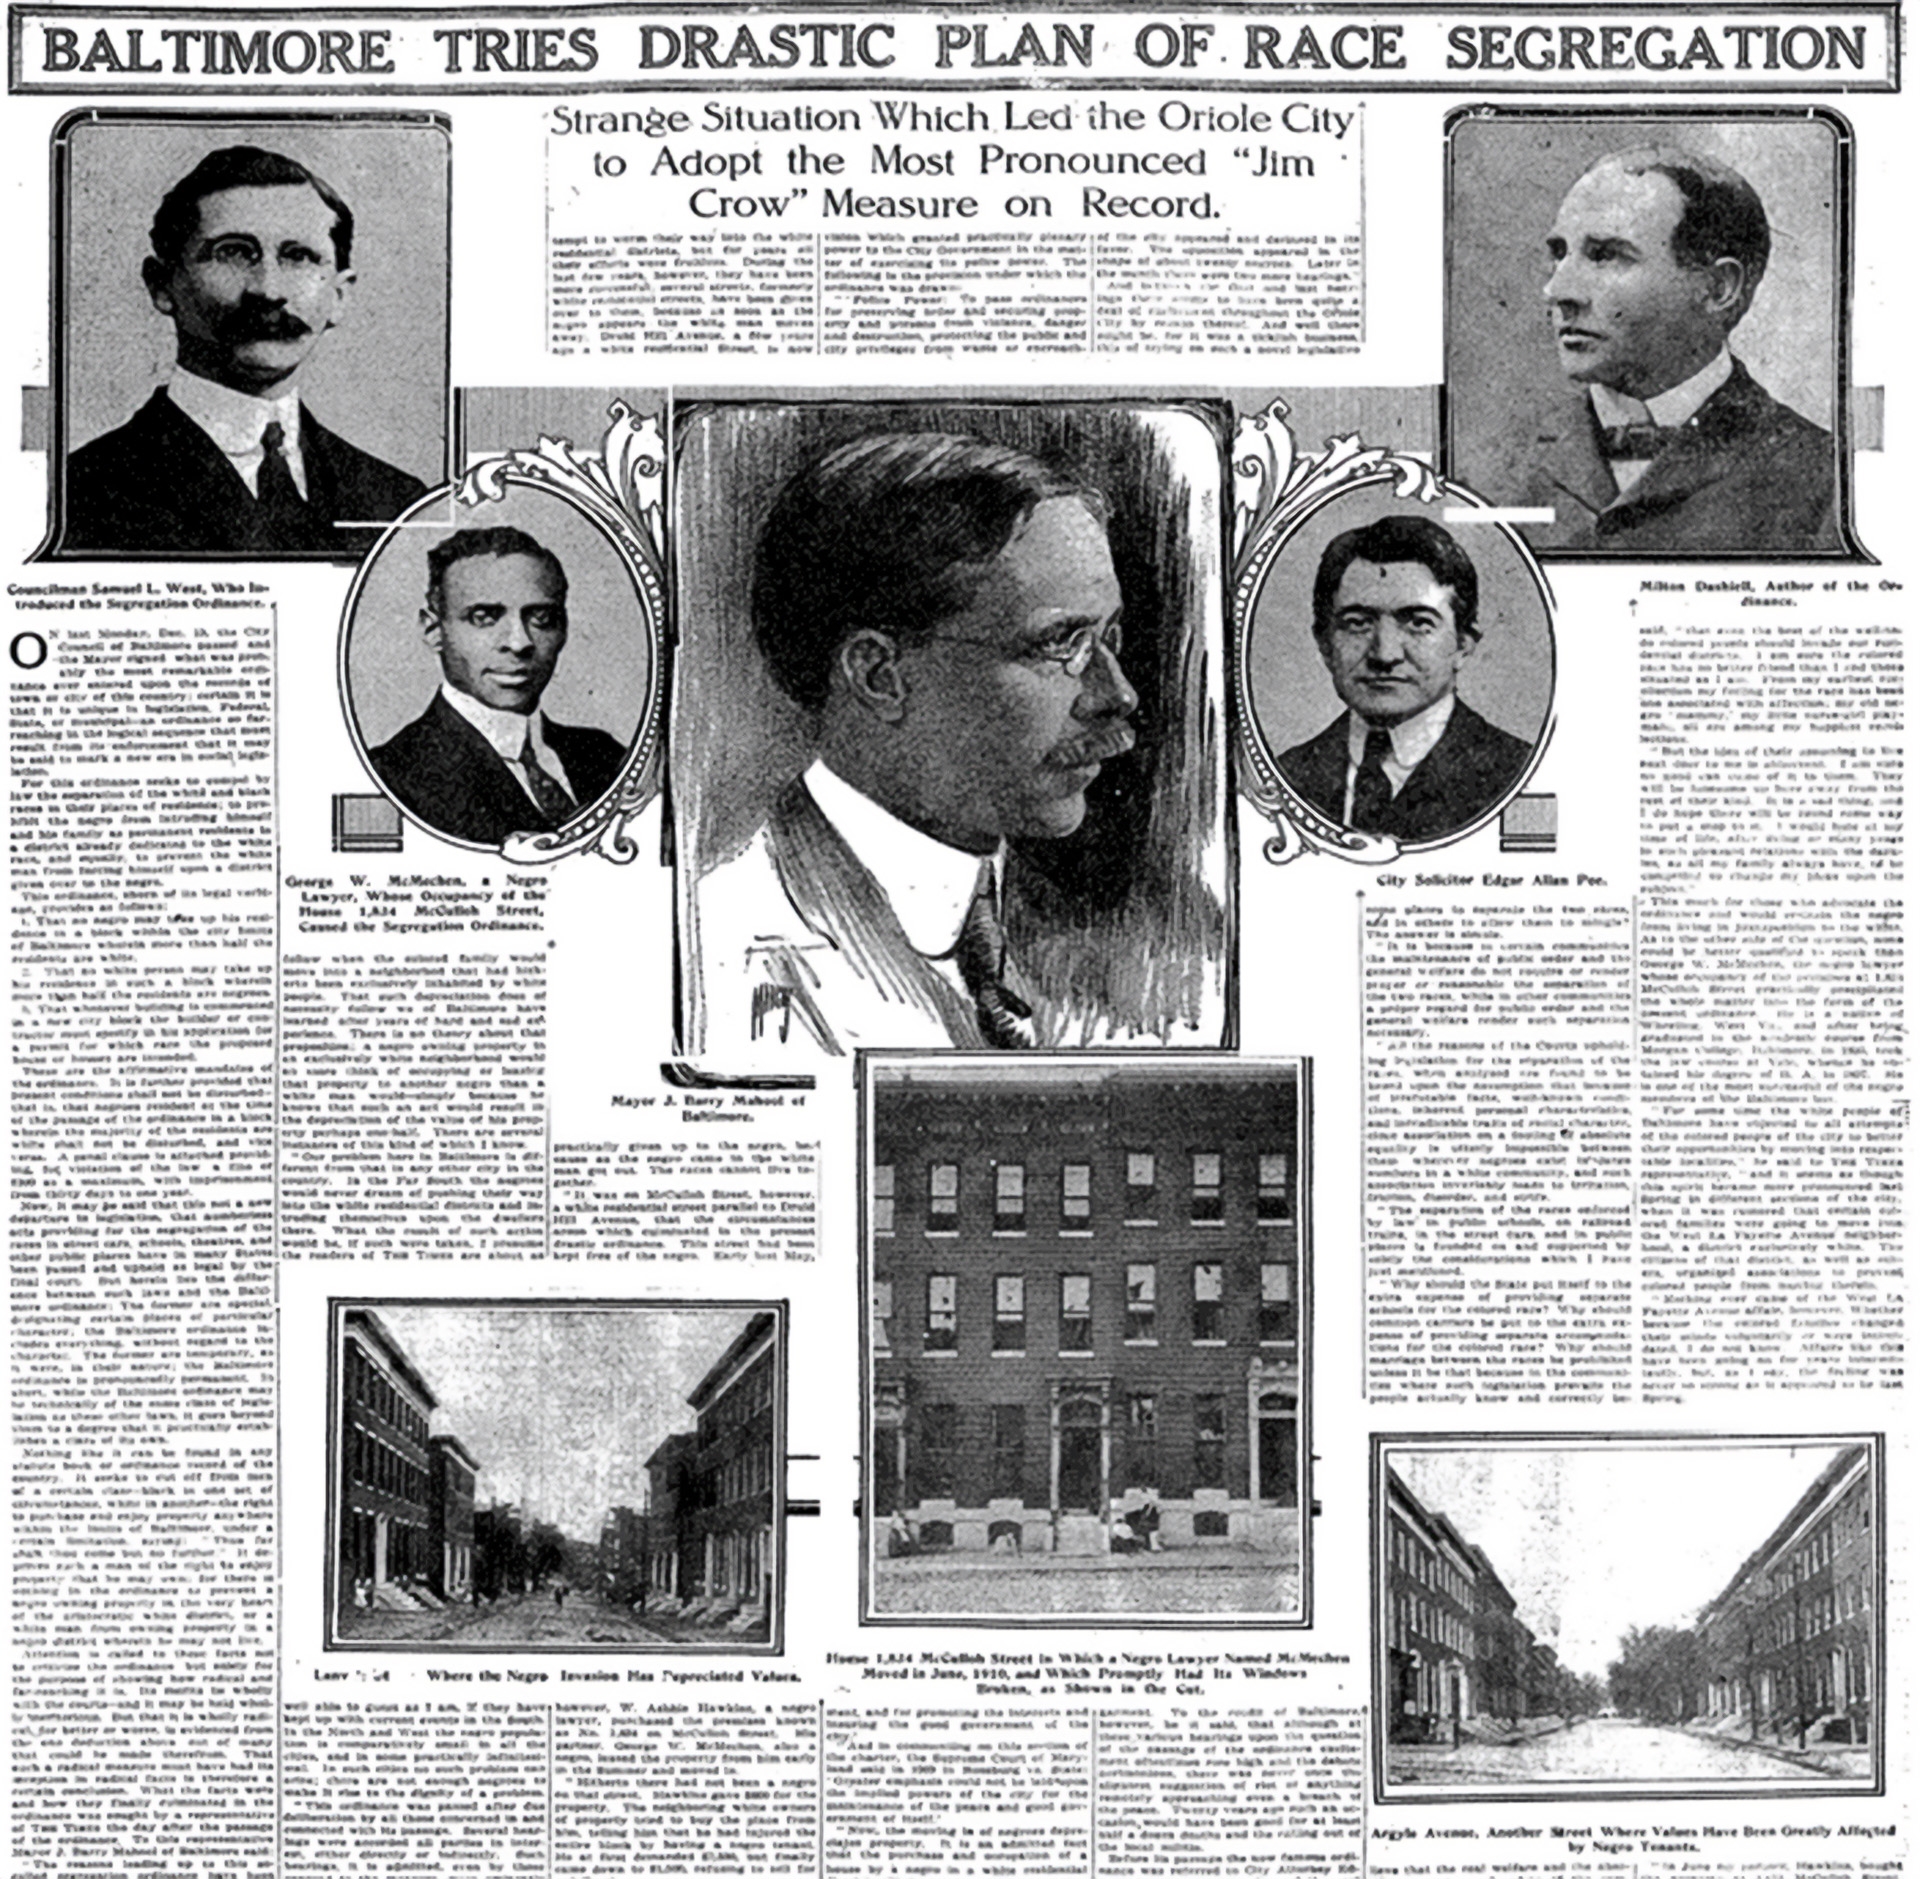 In 1910, Baltimore adopted one of the first residential racial ordinances, limiting home buyers to White blocks or Black blocks. The ordinance made Baltimore a national leader in segregation and encouraged other cities to pass similar legislation.